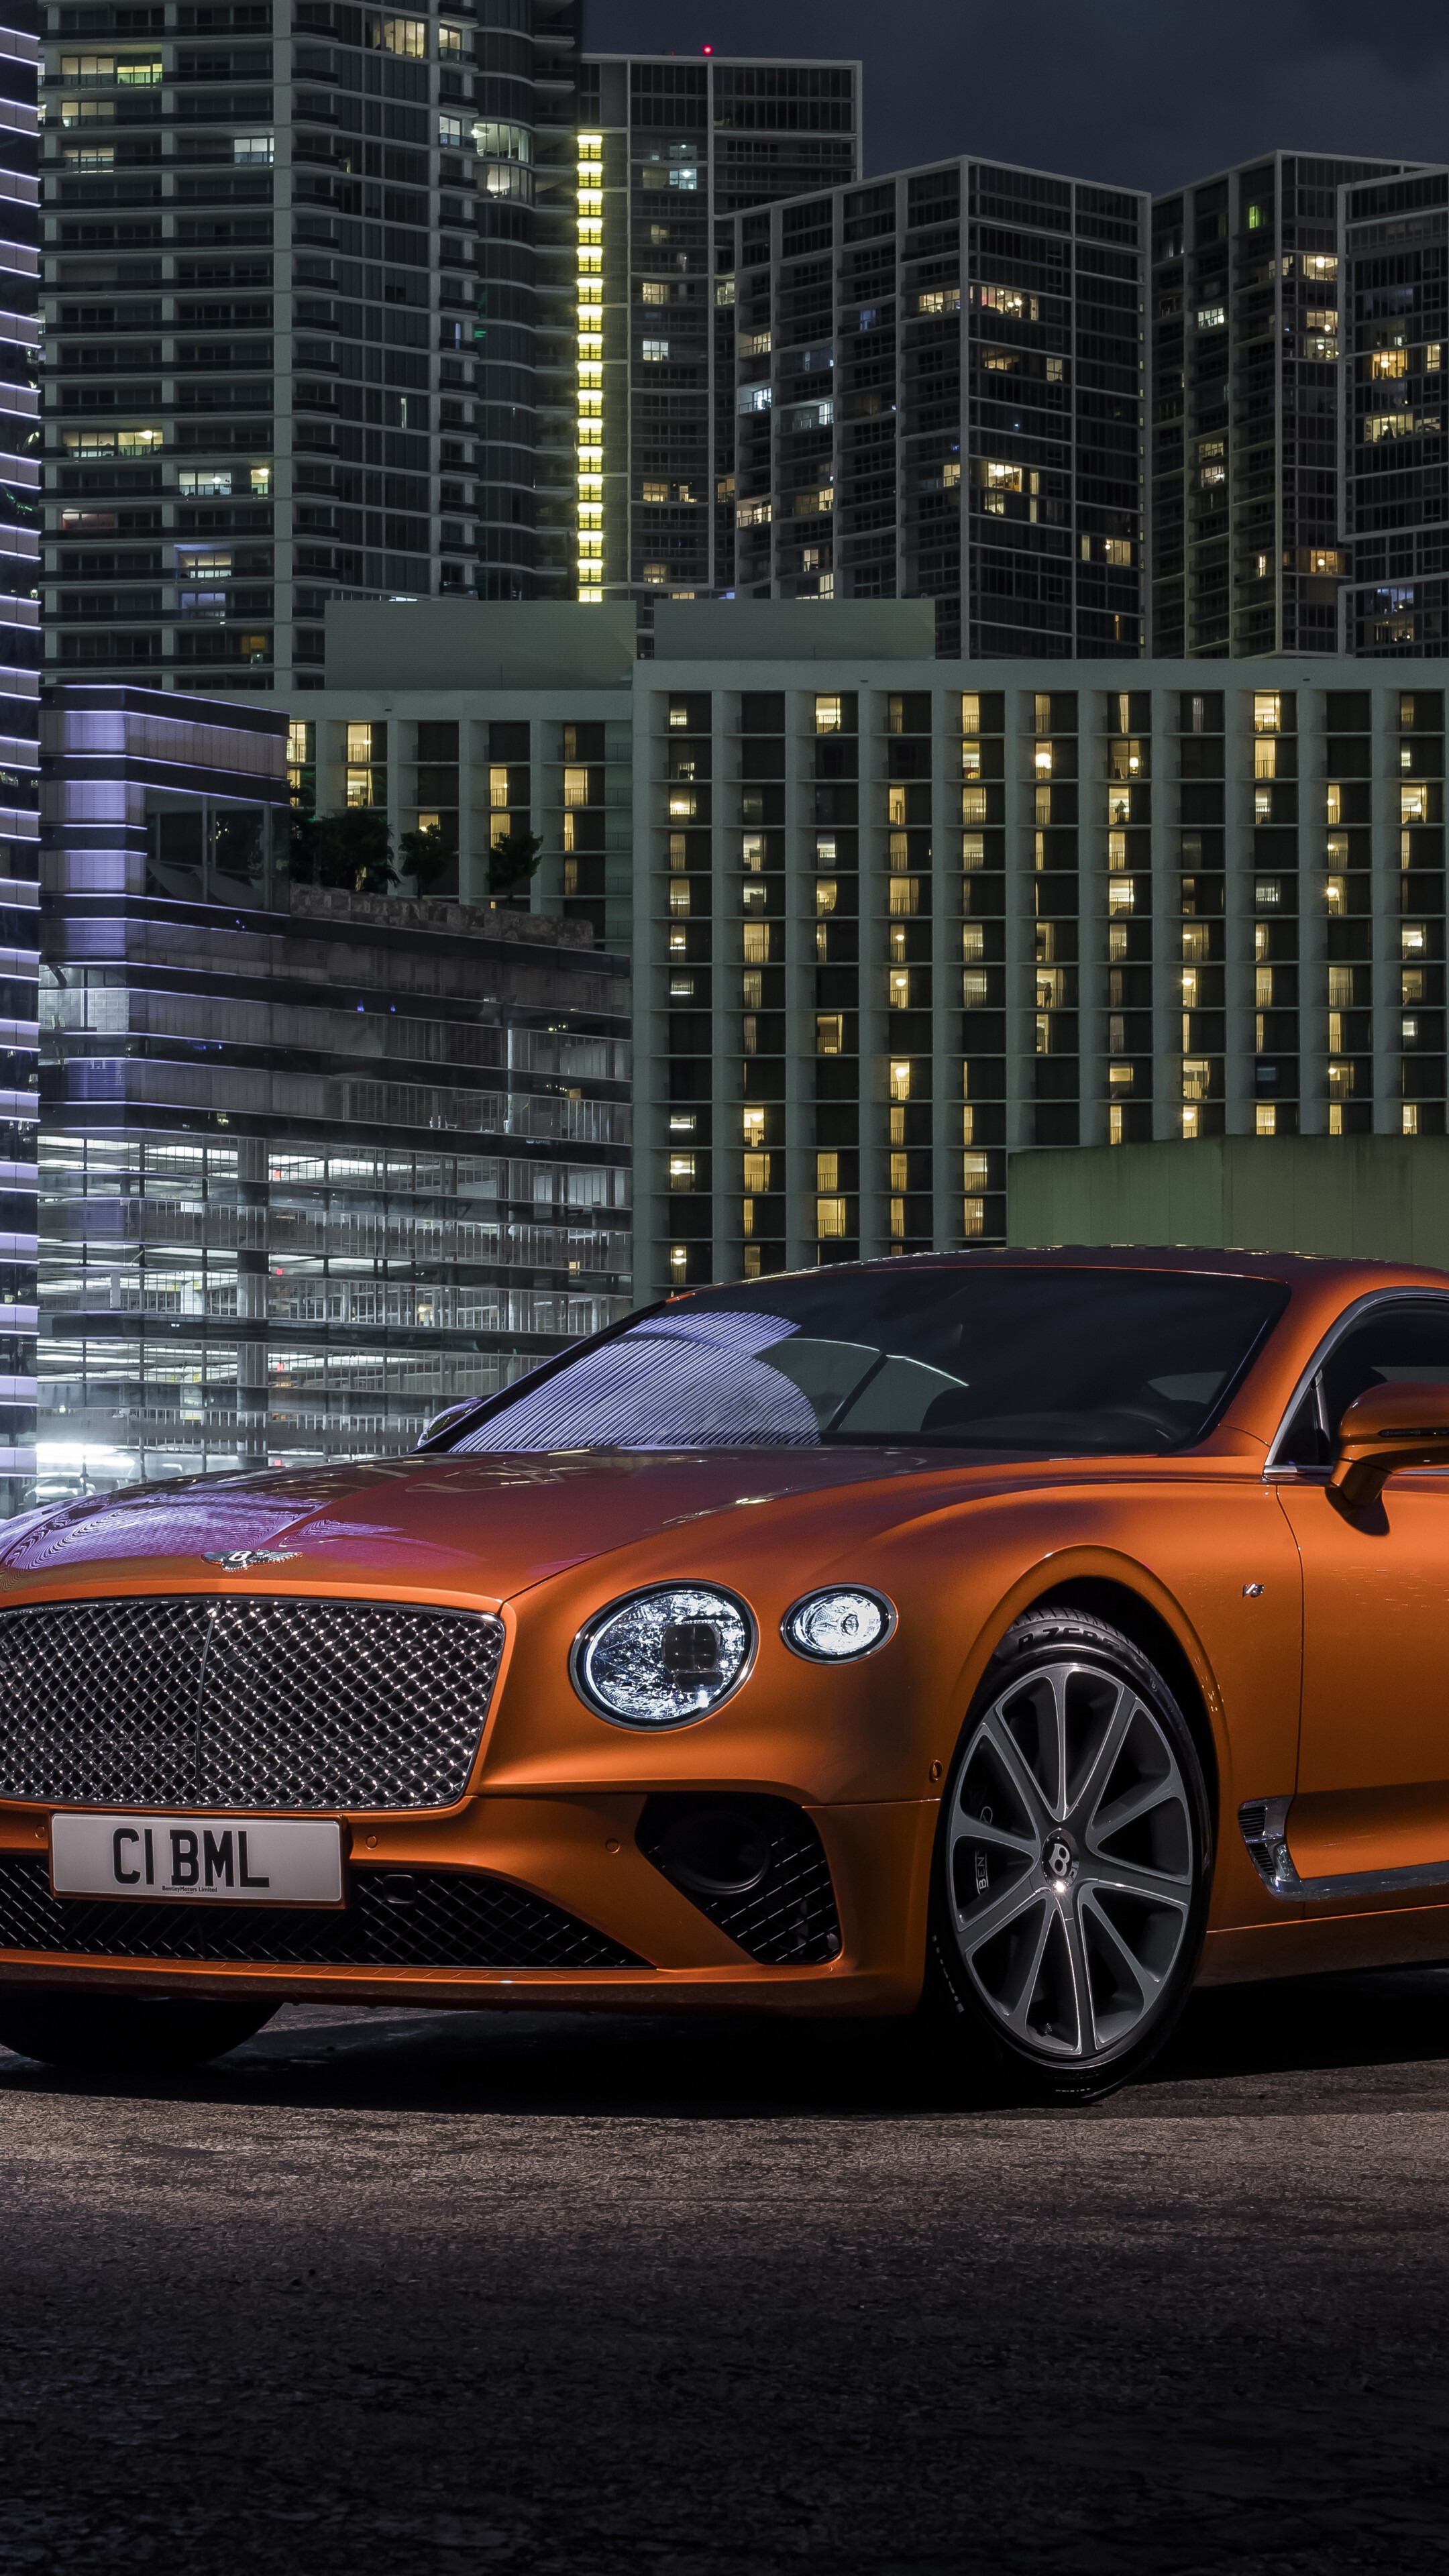 Off-road Bentley Continental GT, Luxurious car wallpaper, Sony Xperia Z5 Premium, Stunning visuals, 2160x3840 4K Phone